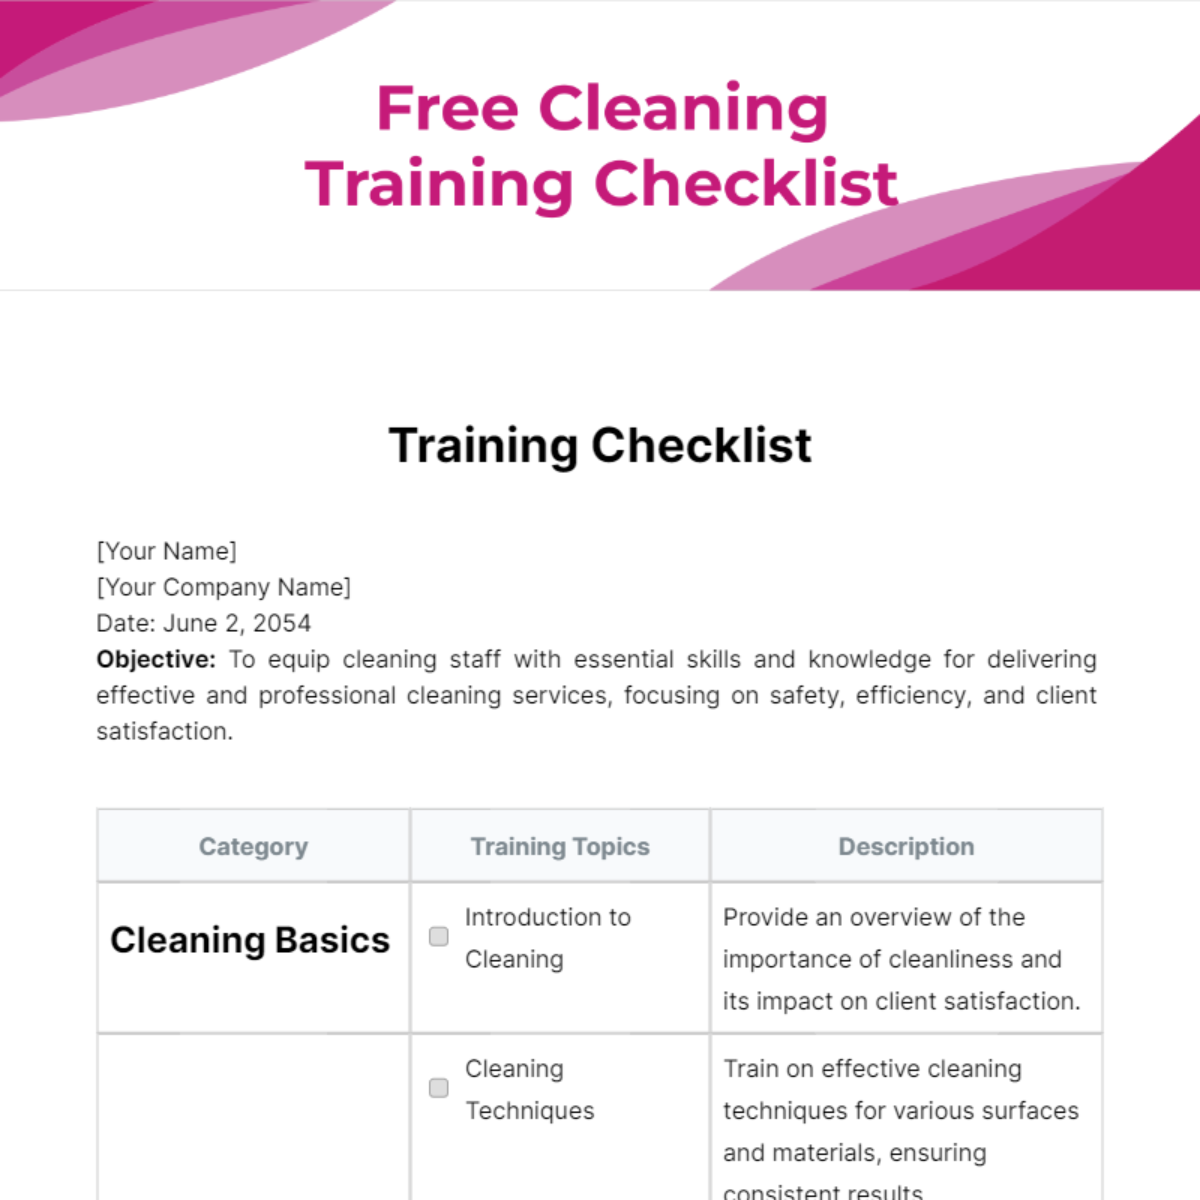 Free Cleaning Training Checklist Template